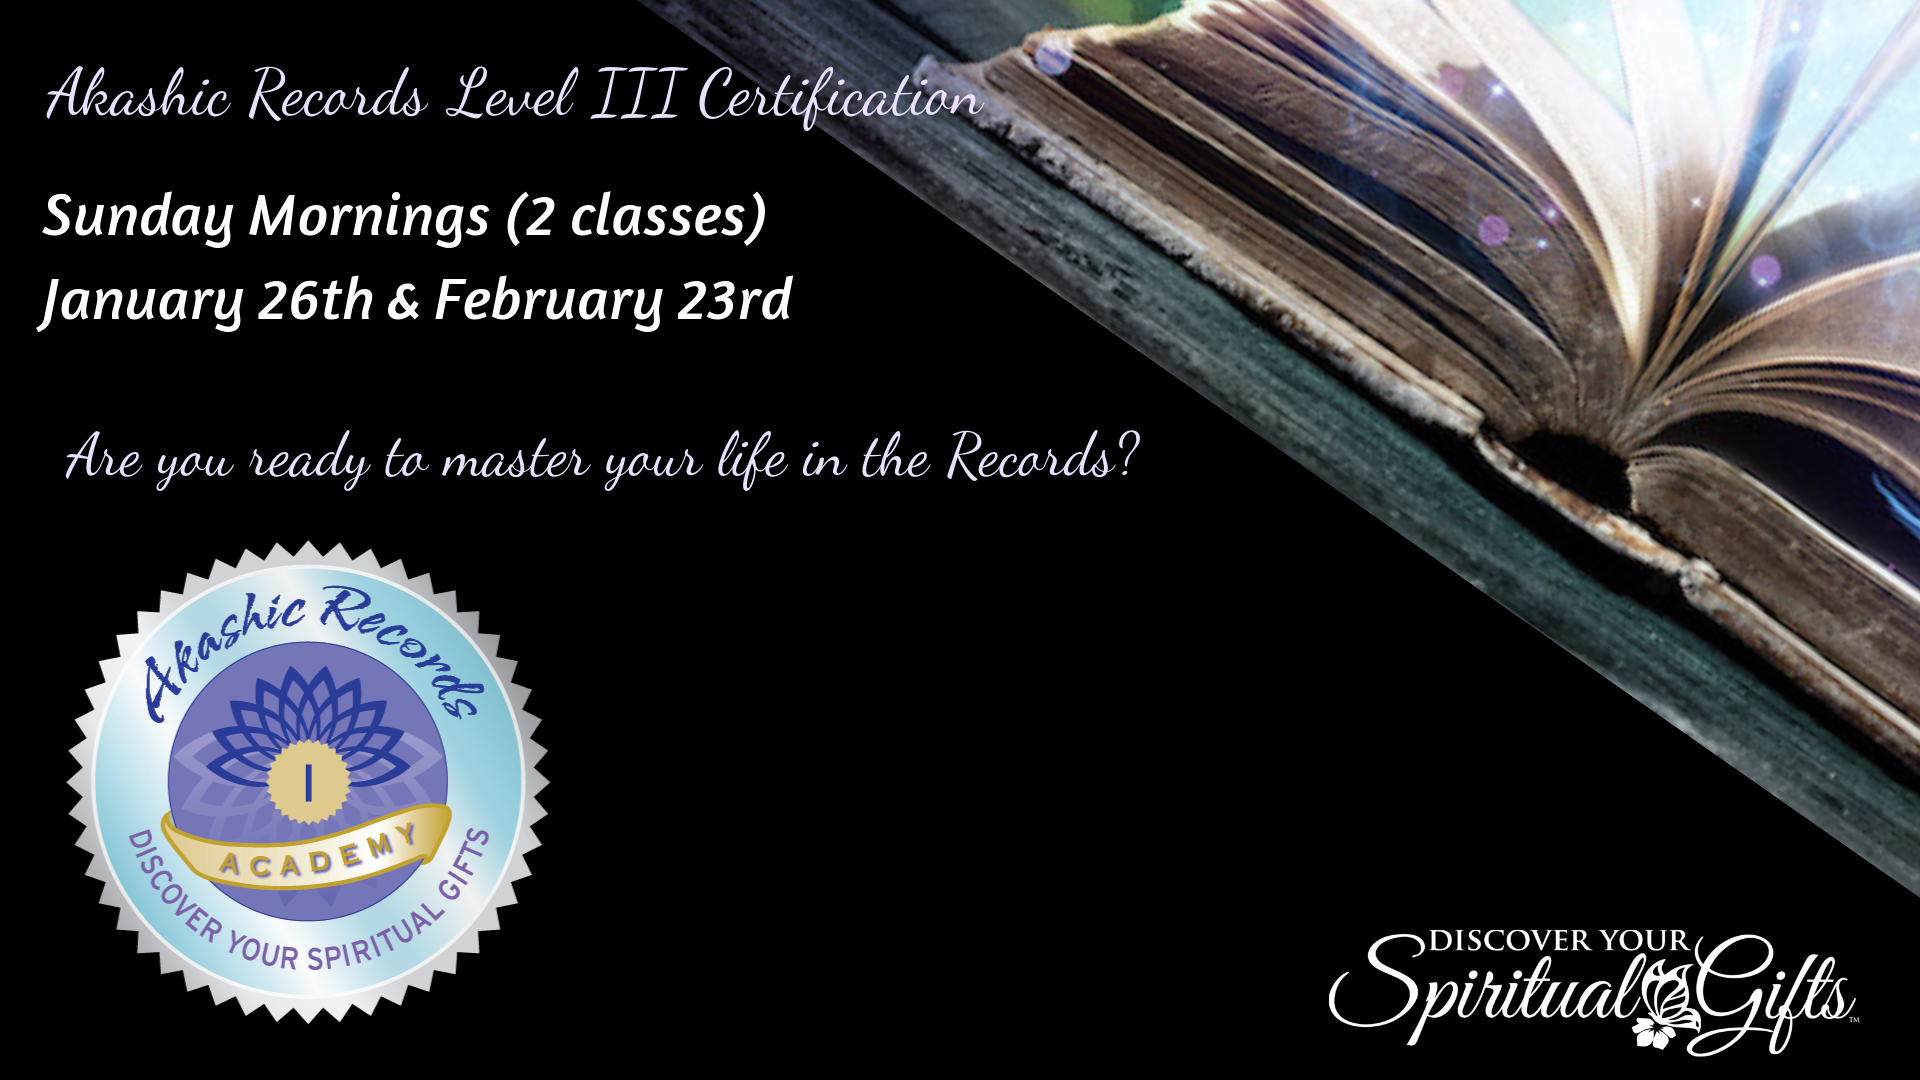 Akashic RecordReader Practitioner Level III Certification (1 of 2 Classes)